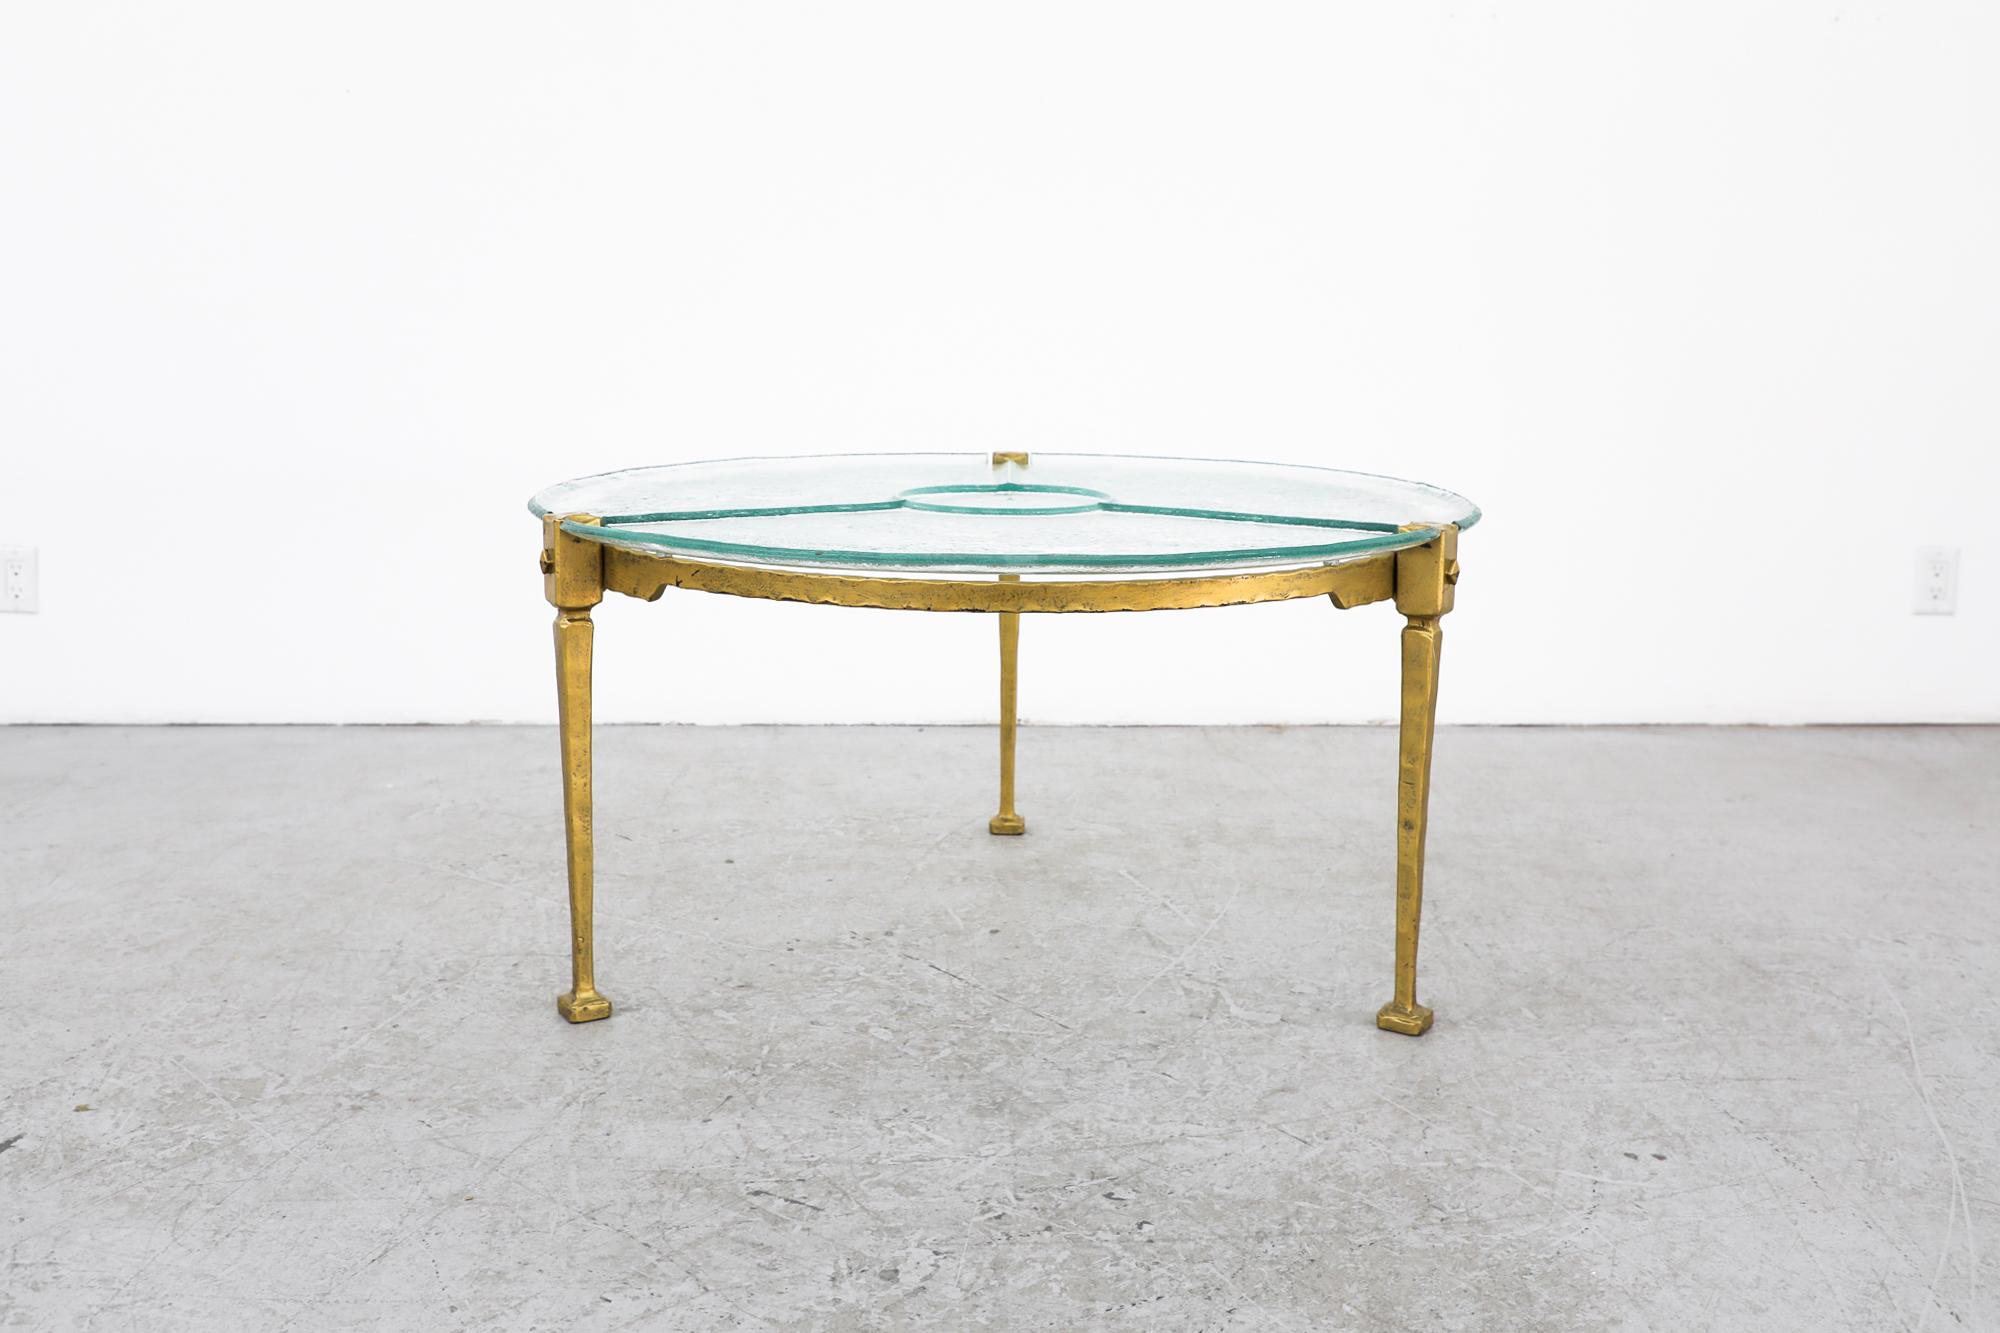 Stunning Brutalist round enameled coffee or side table with slumped textured glass top and gold enameled metal frame. Designed by German multi disciplined designer and sculptor Lothar Klute (1946). In original condition with visible wear consistent